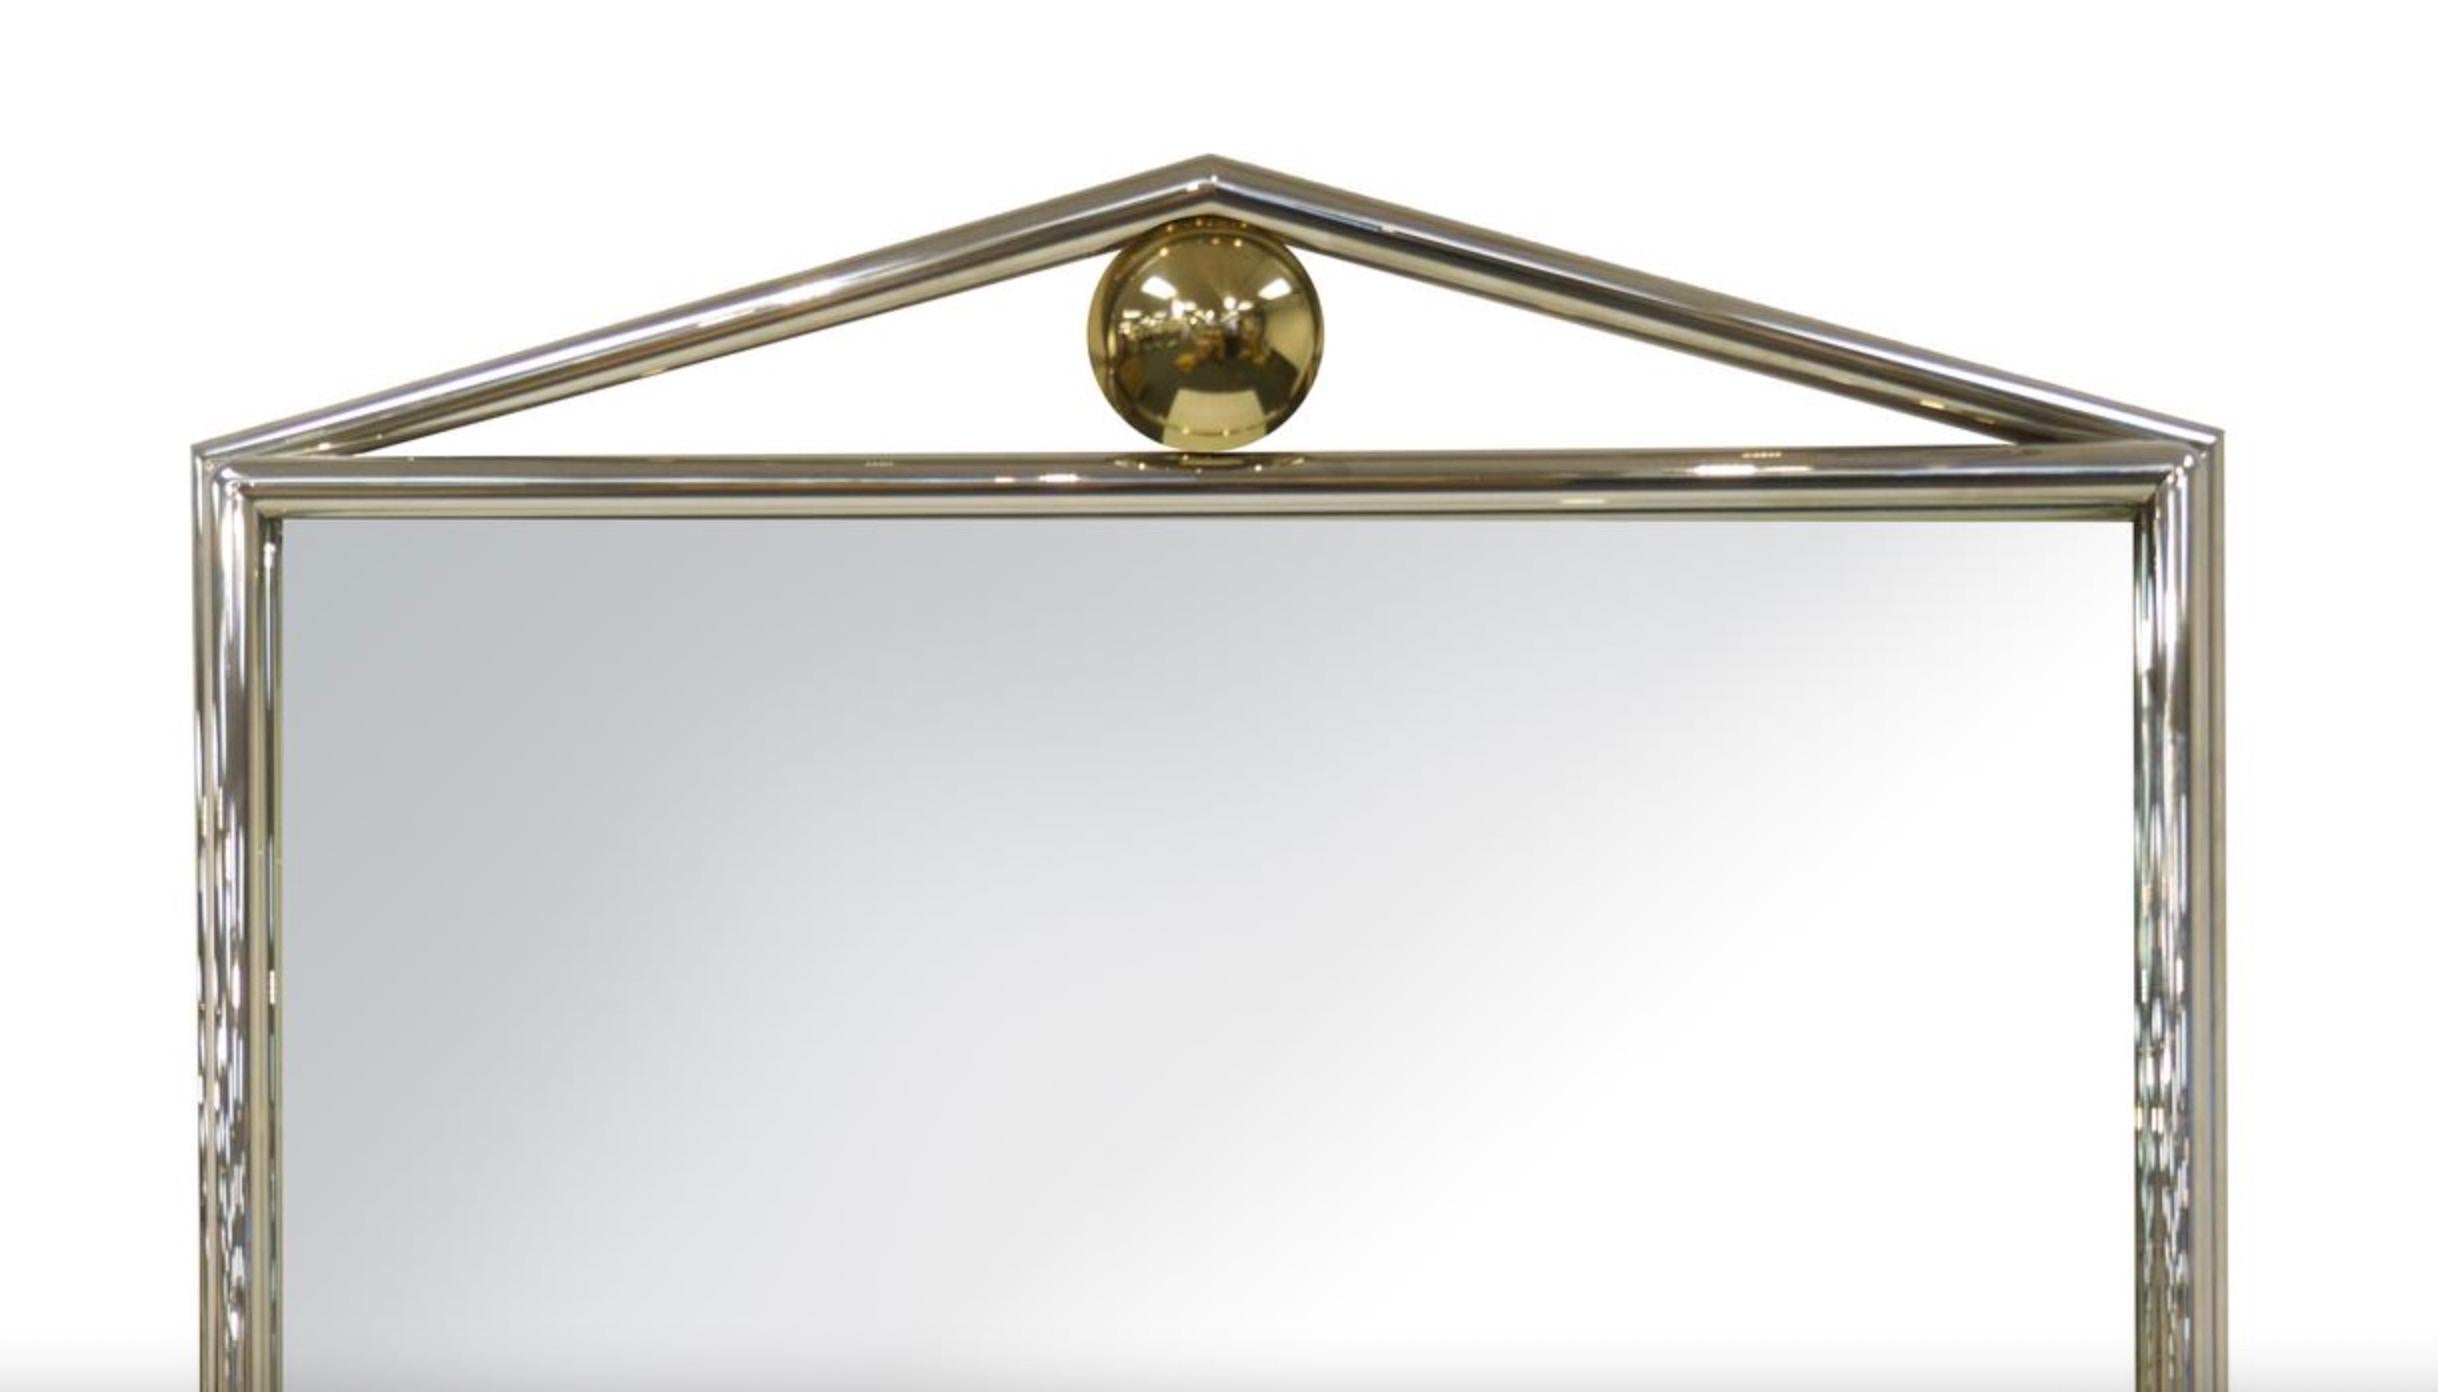 Elevate your decor with this Exceptional Mid-Century Modern Chrome Framed Mantel Mirror, a piece that seamlessly blends bold, clean lines with striking design elements, creating a captivating focal point for your living space. The mirror's